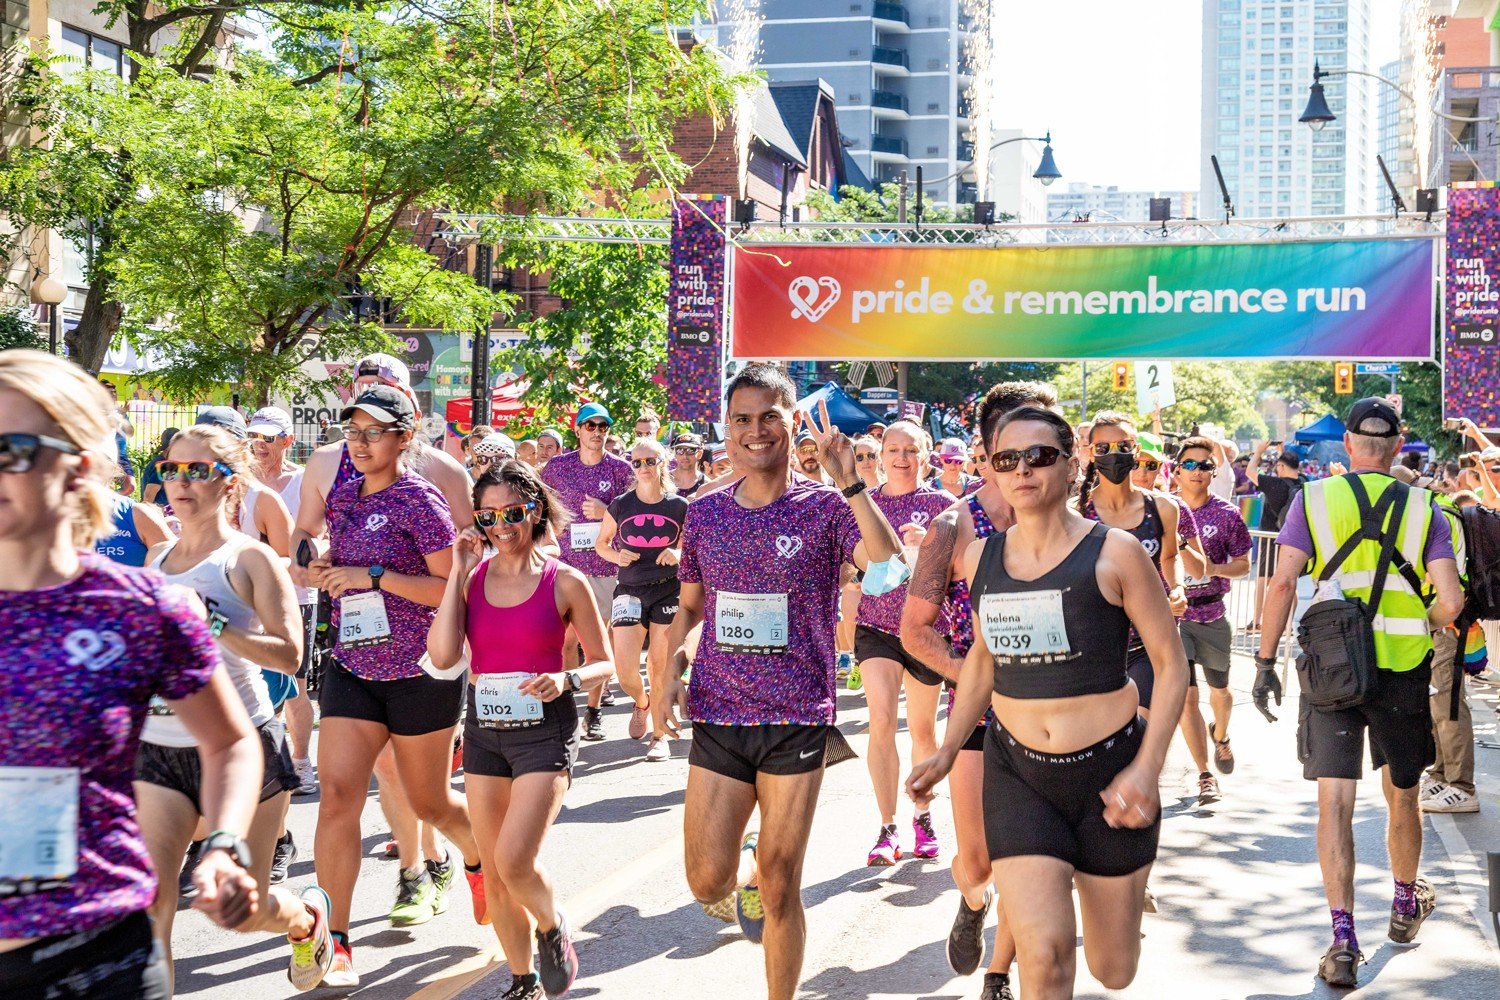 Toronto&rsquo;s Pride &amp; Remembrance run returns to the Church-Wellesley Village on the morning of Saturday, June 29th for its 28th annual event. The run will offer three events: a 5KM run, 3KM walk, and kids race in the heart of Toronto&rsquo;s g